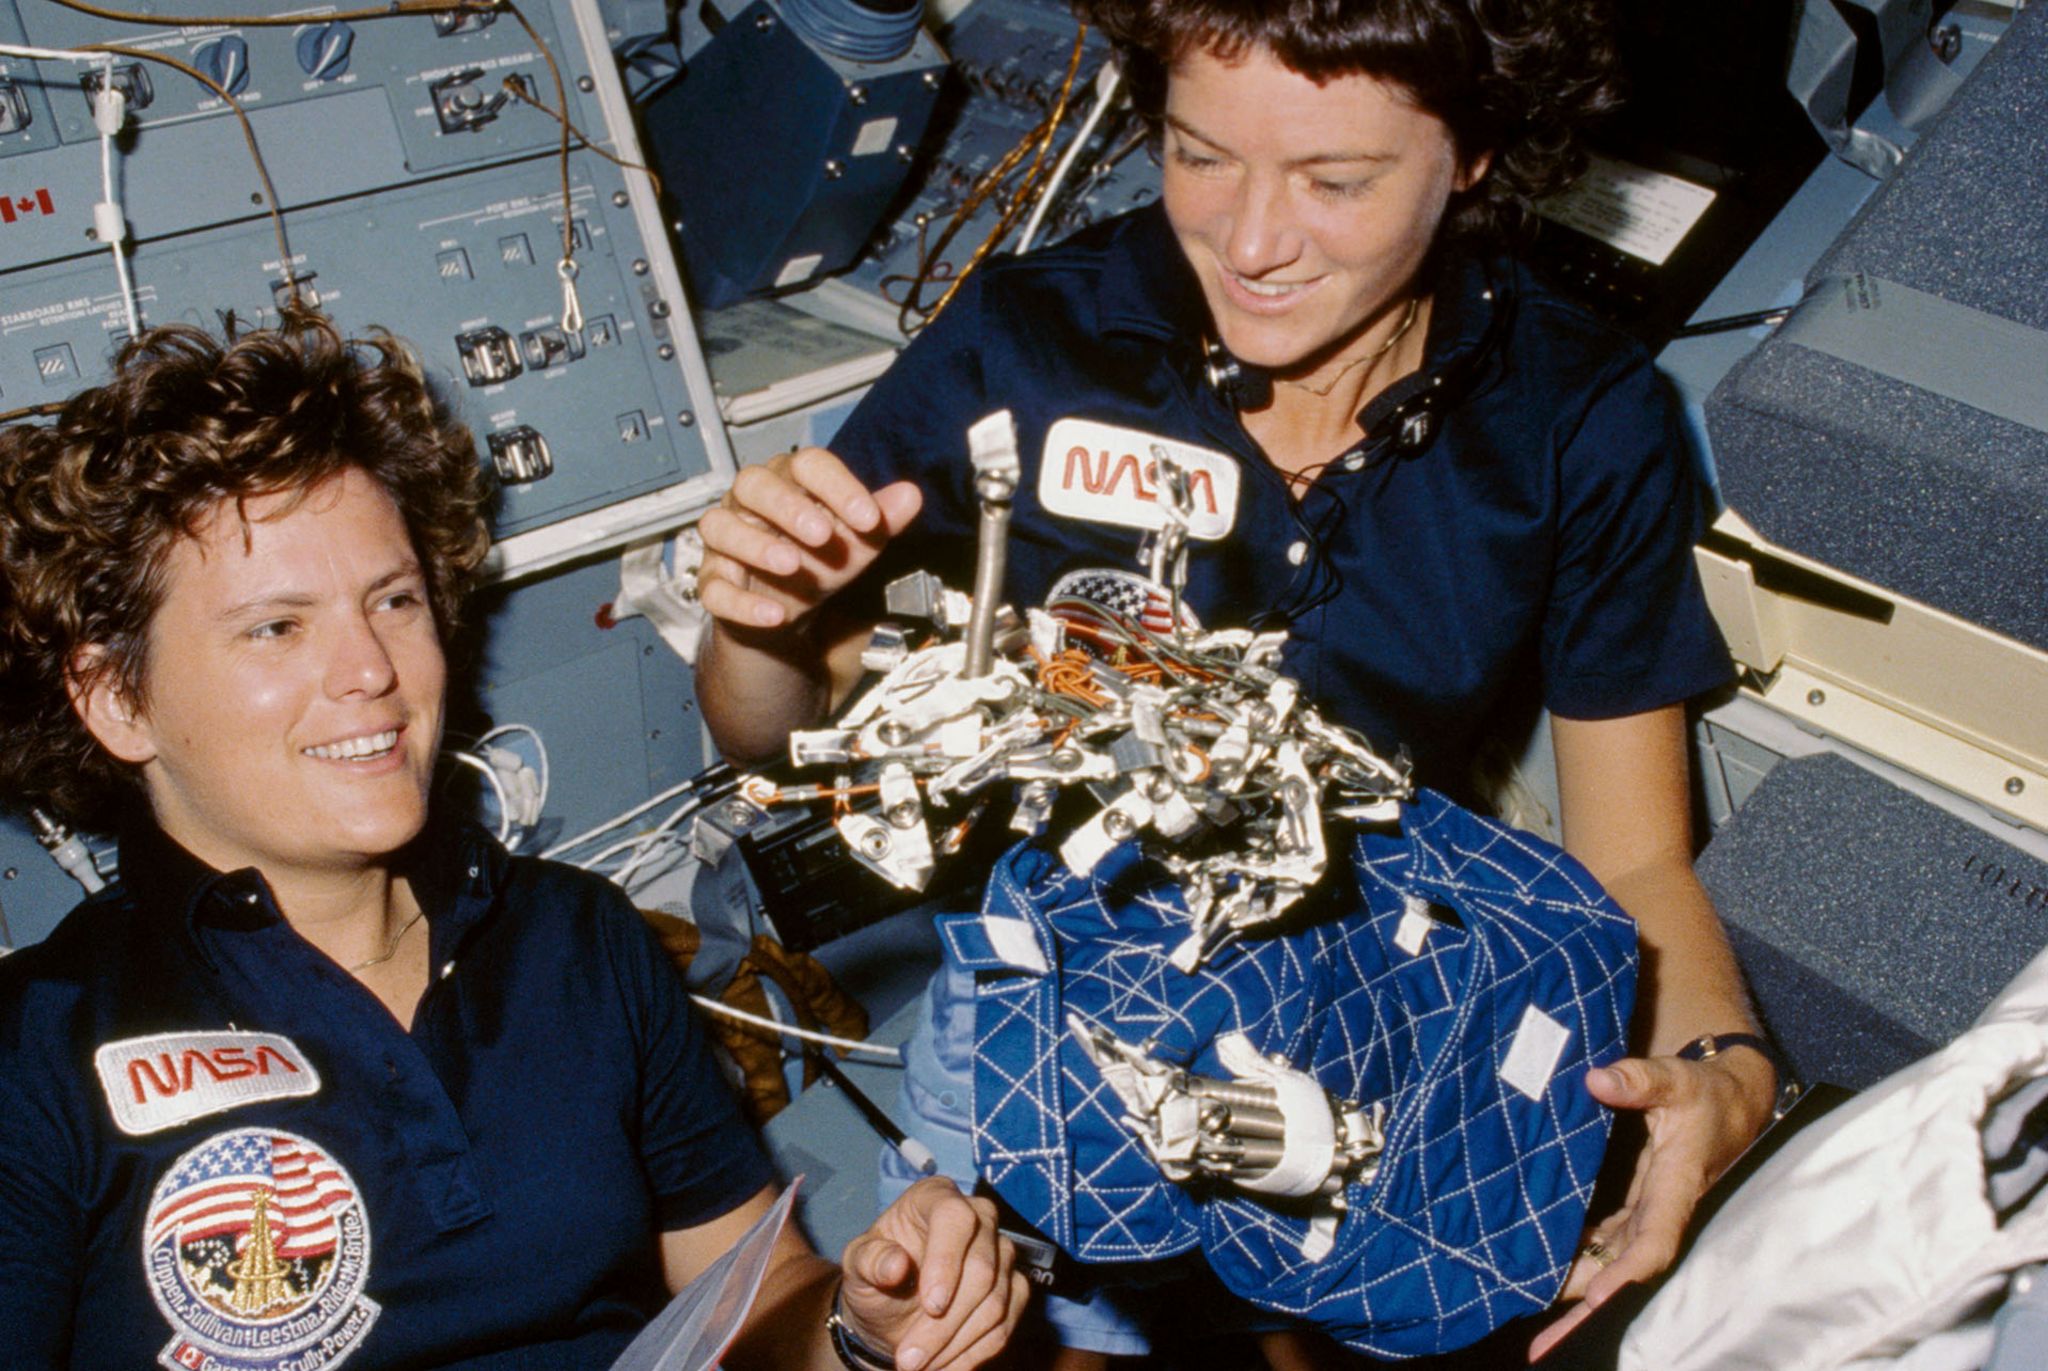 Astronauts Kathryn D. Sullivan, left, and Sally K. Ride display a "bag of worms." The "bag" is a sleep restraint and the majority of the "worms" are springs and clips used with the sleep restraint in its normal application